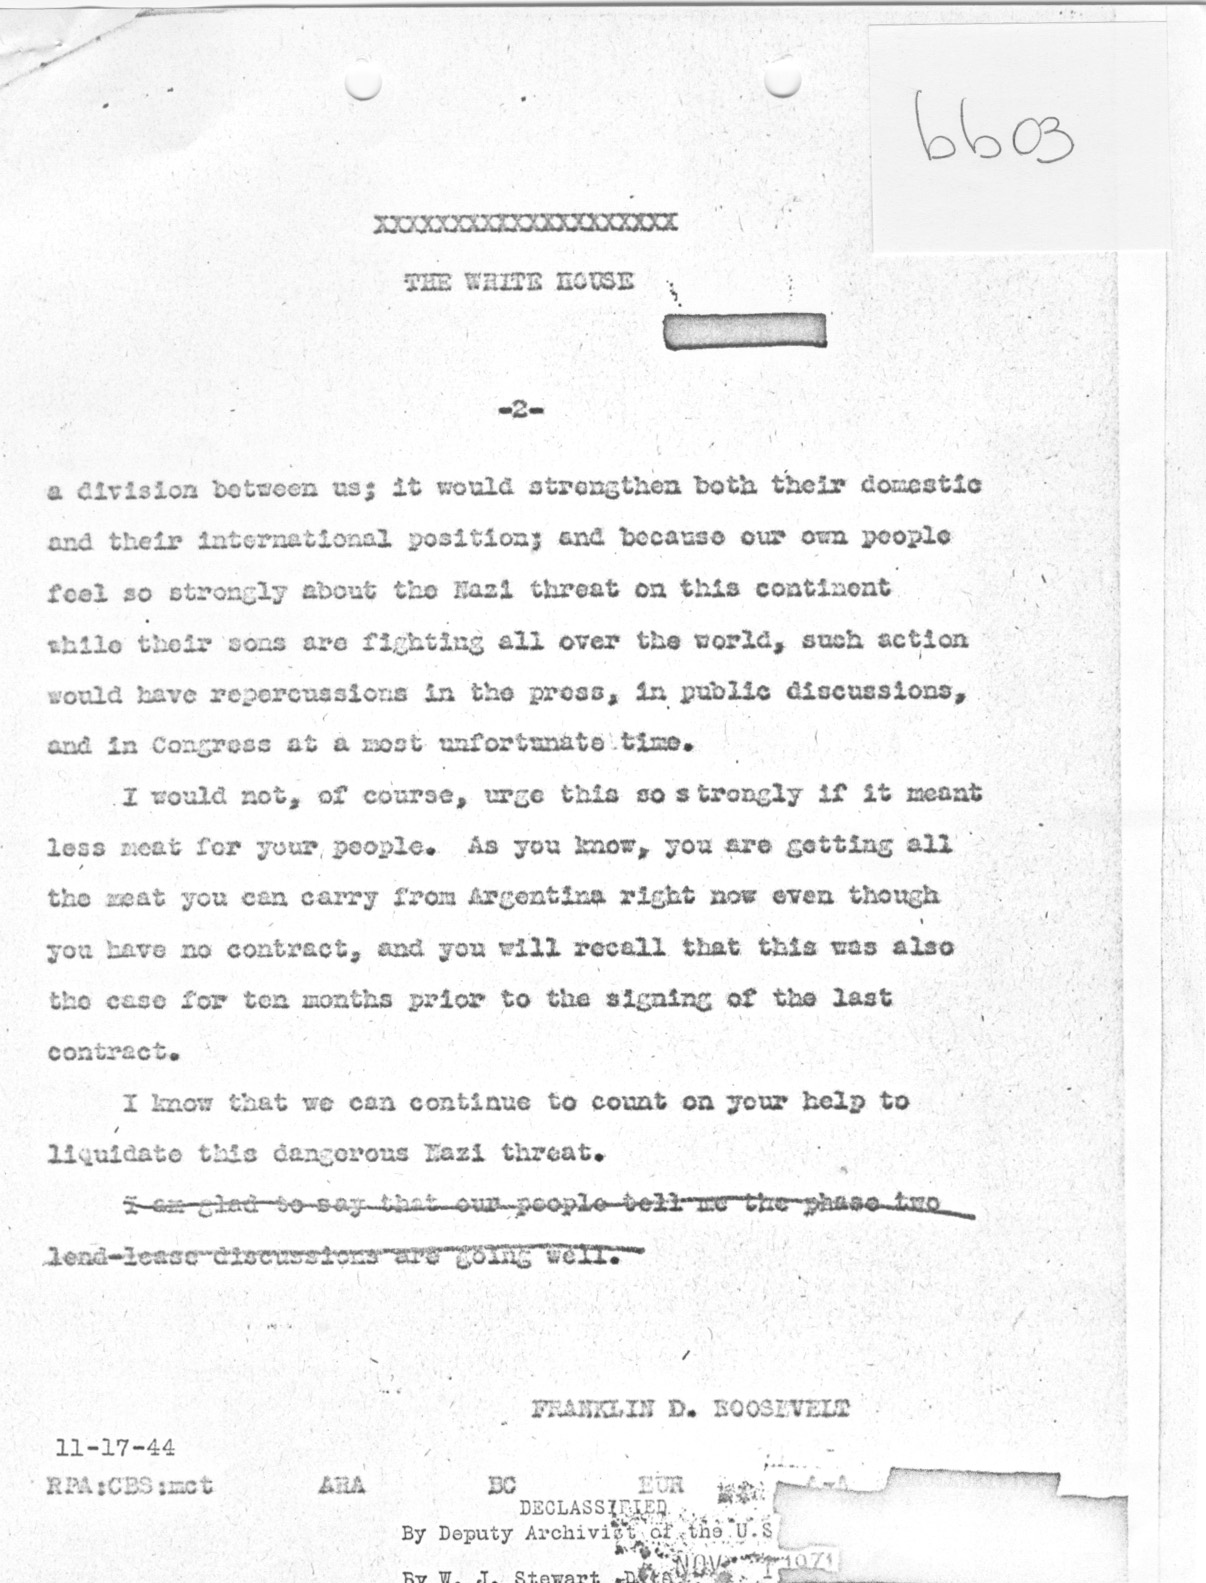 [a335bb03.jpg] - Note from FDR 11/18/44